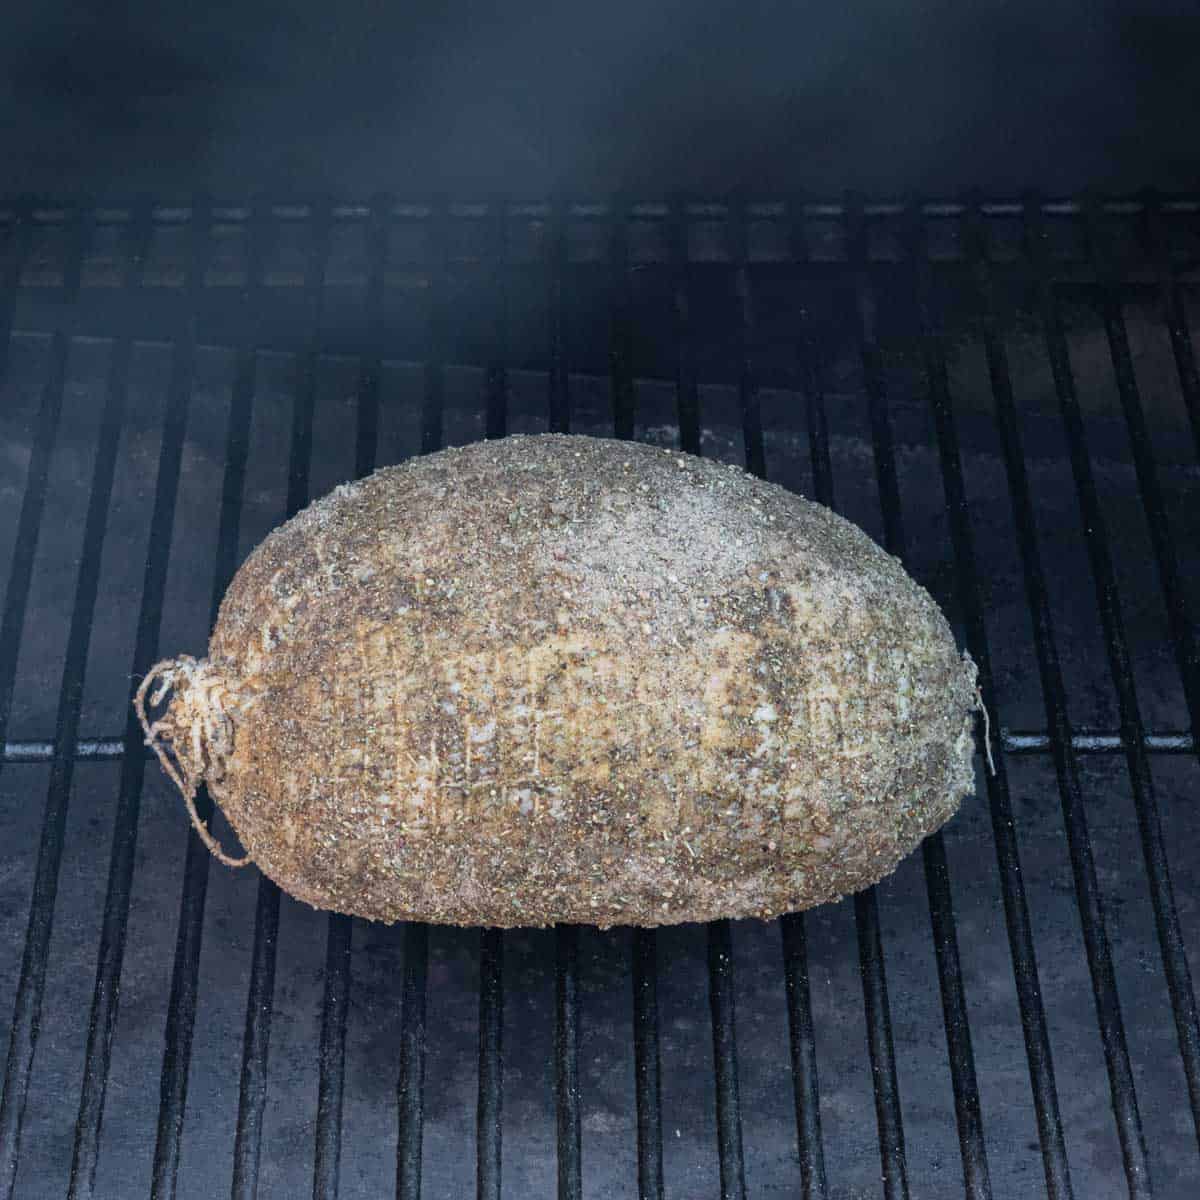 Seasoned breast placed on the smoker grill grates.